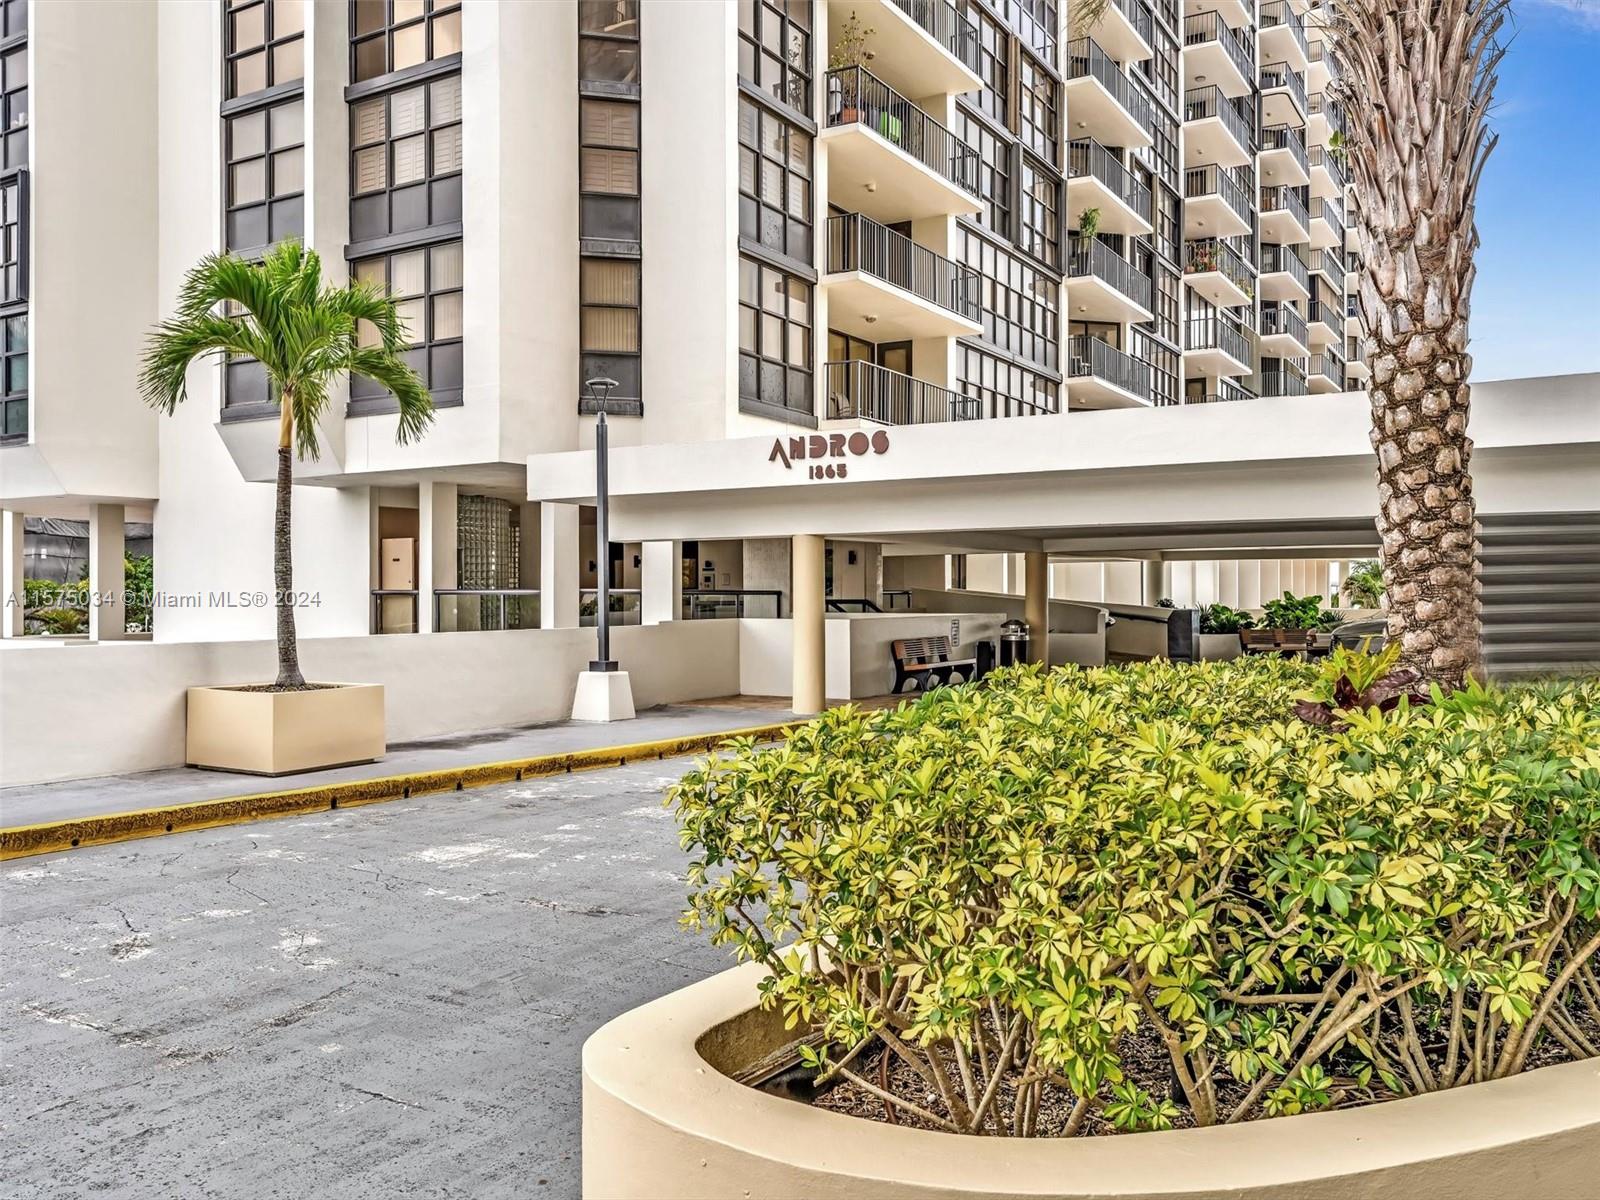 Luxury fully furnished and spacious 1 bedroom, 1.5-bathroom apartment in the heart of Brickell.  Breathtaking water and city views, spacious balcony.  High end finishes thought.  Steps from top restaurants and shops.